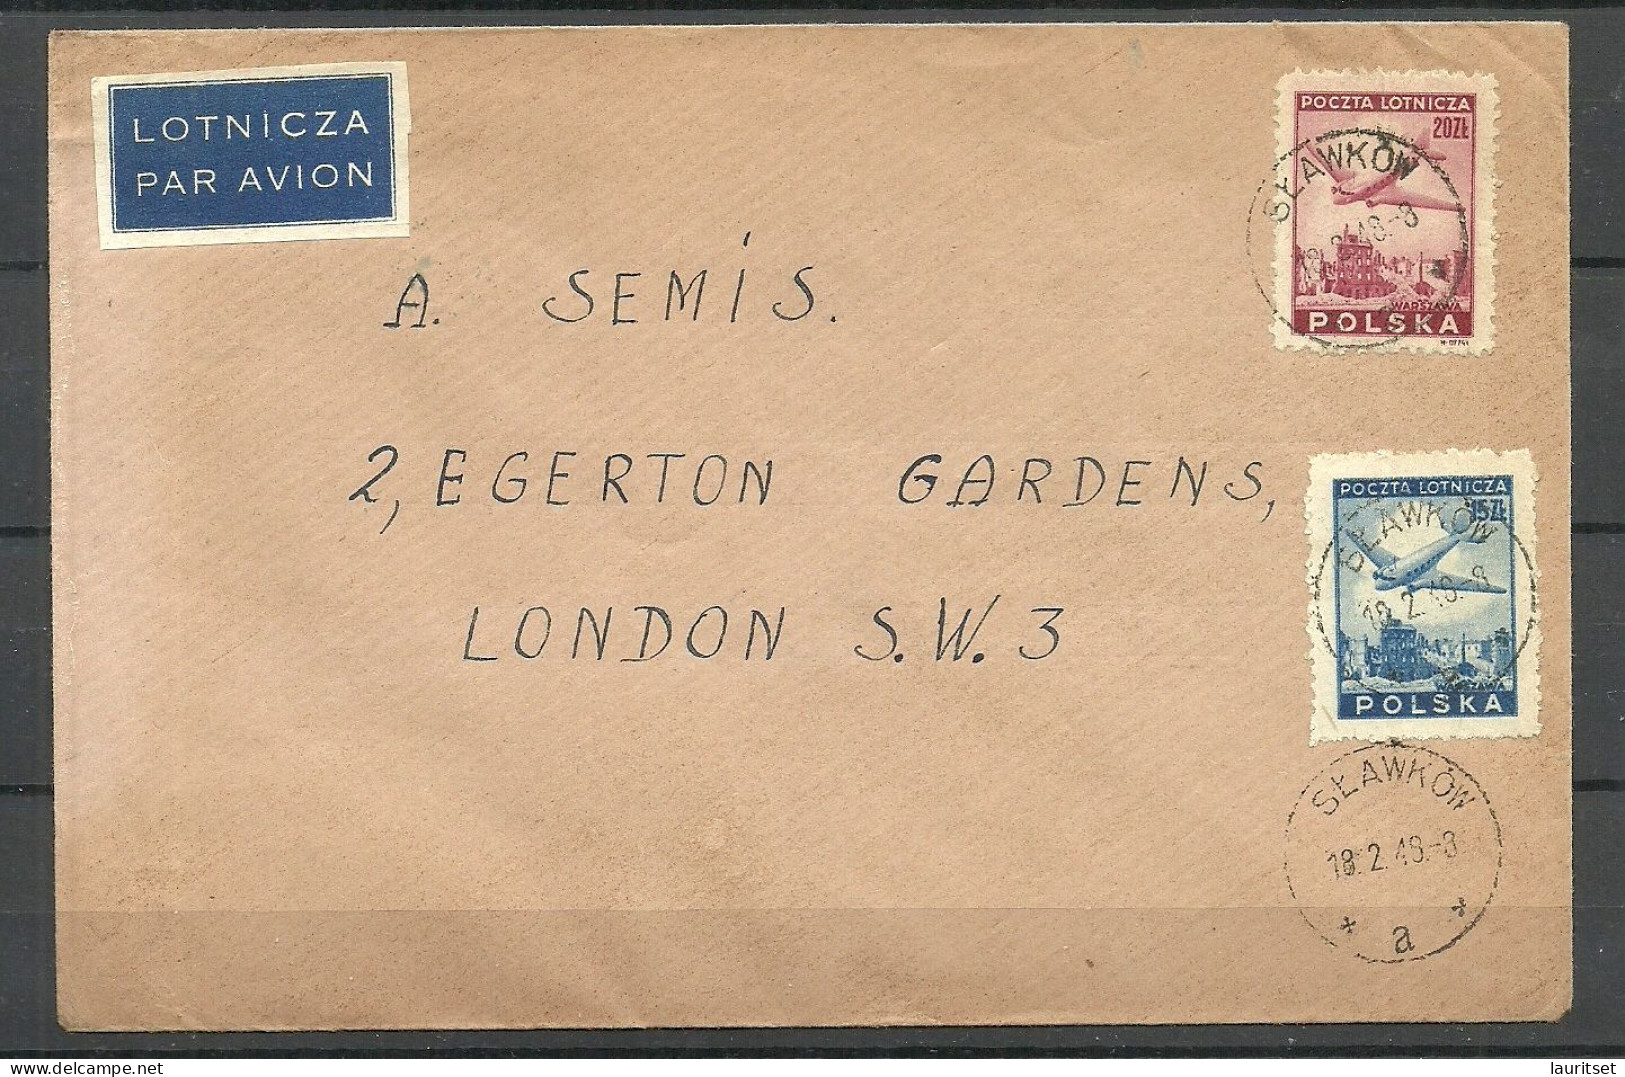 POLEN Poland 1948 Air Mail Cover O SLAWKOW To London Great Britain - Flugzeuge